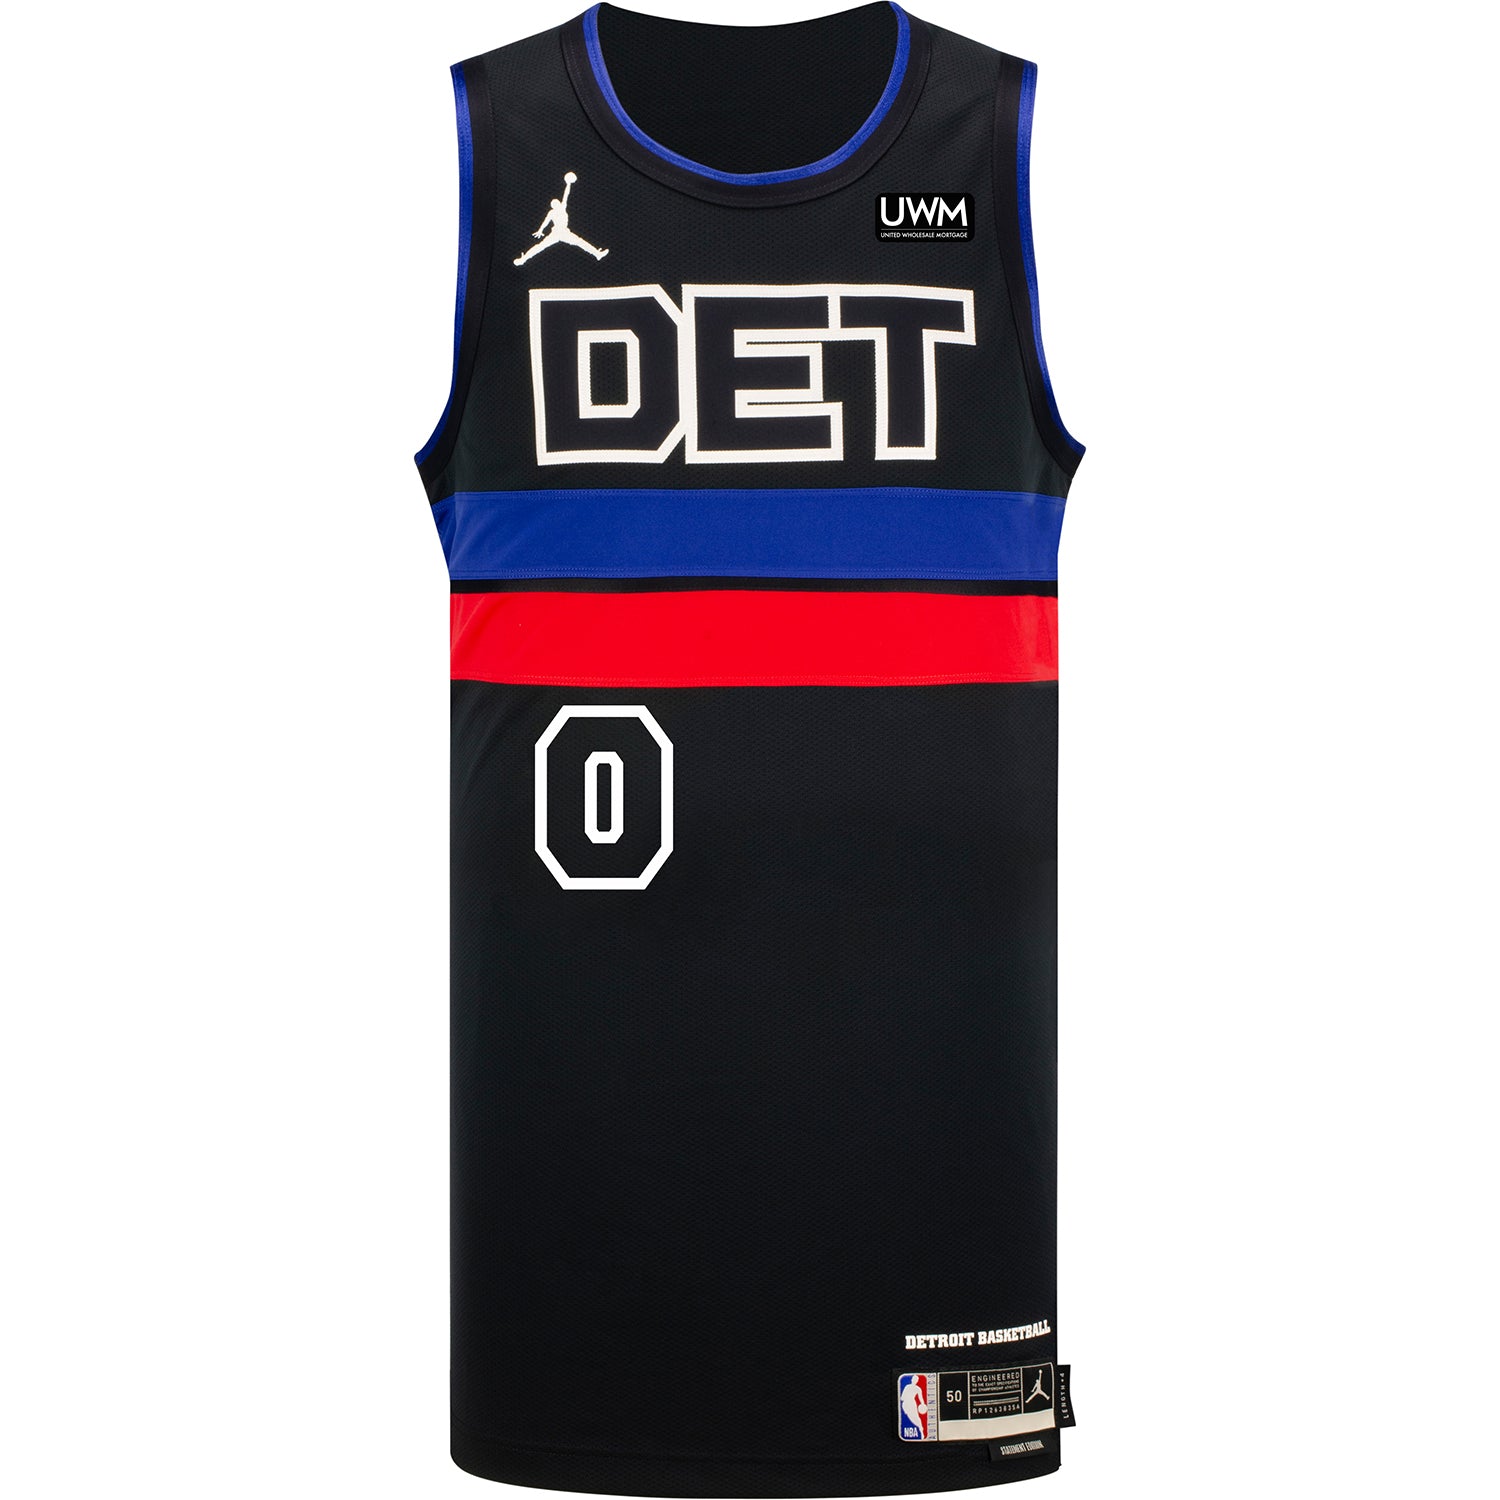 Detroit Pistons - Our official 2022-23 city edition jersey